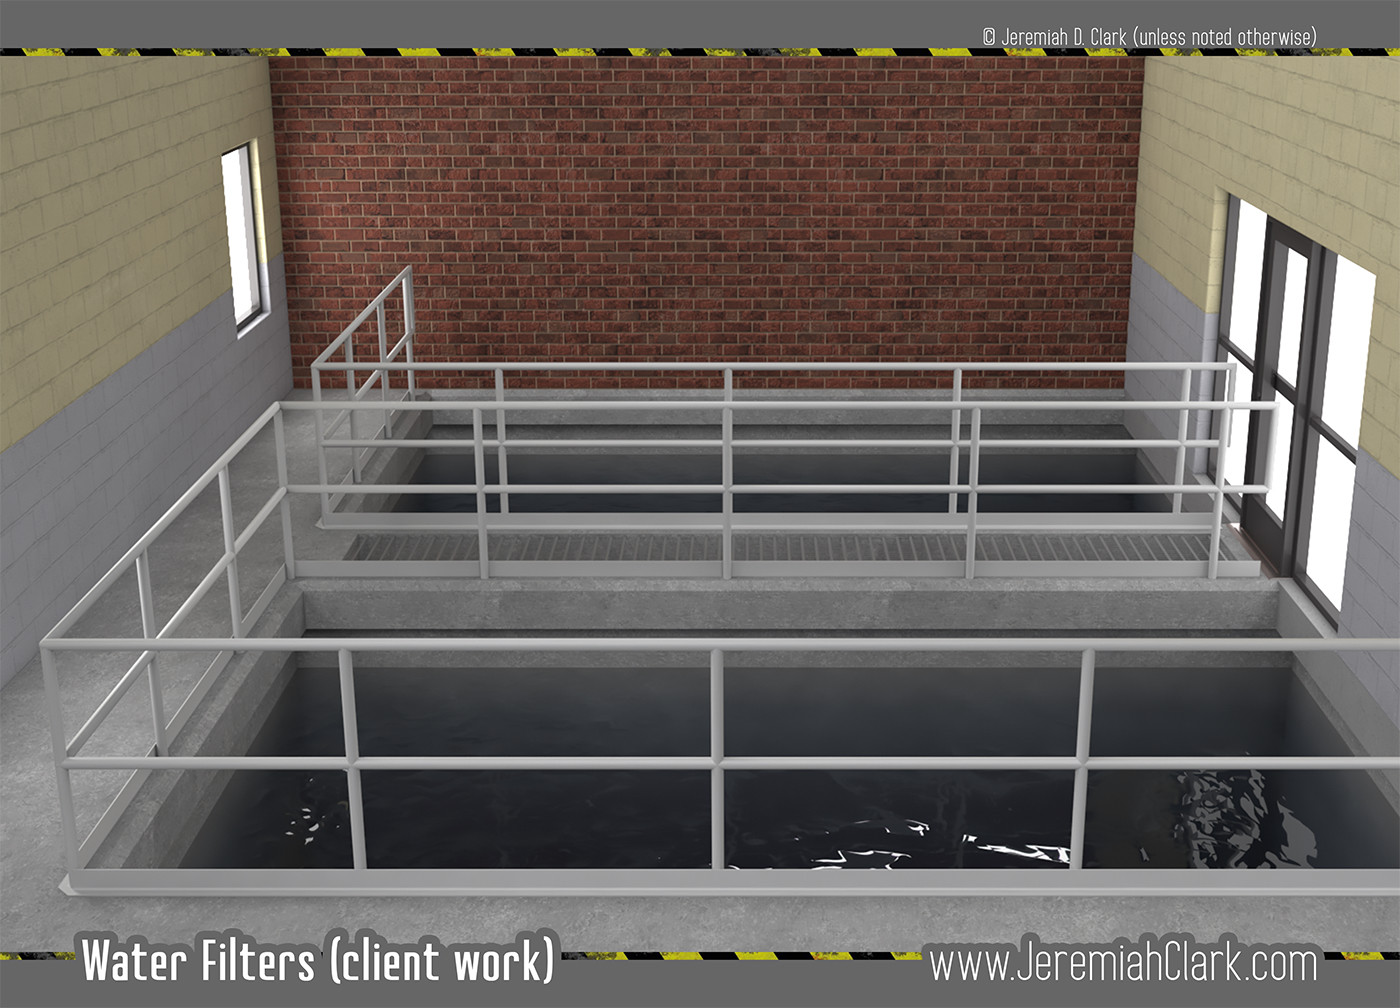 Water Filter Screen.
Modeled and textured in 3Ds Max.
Rendered with V-Ray.